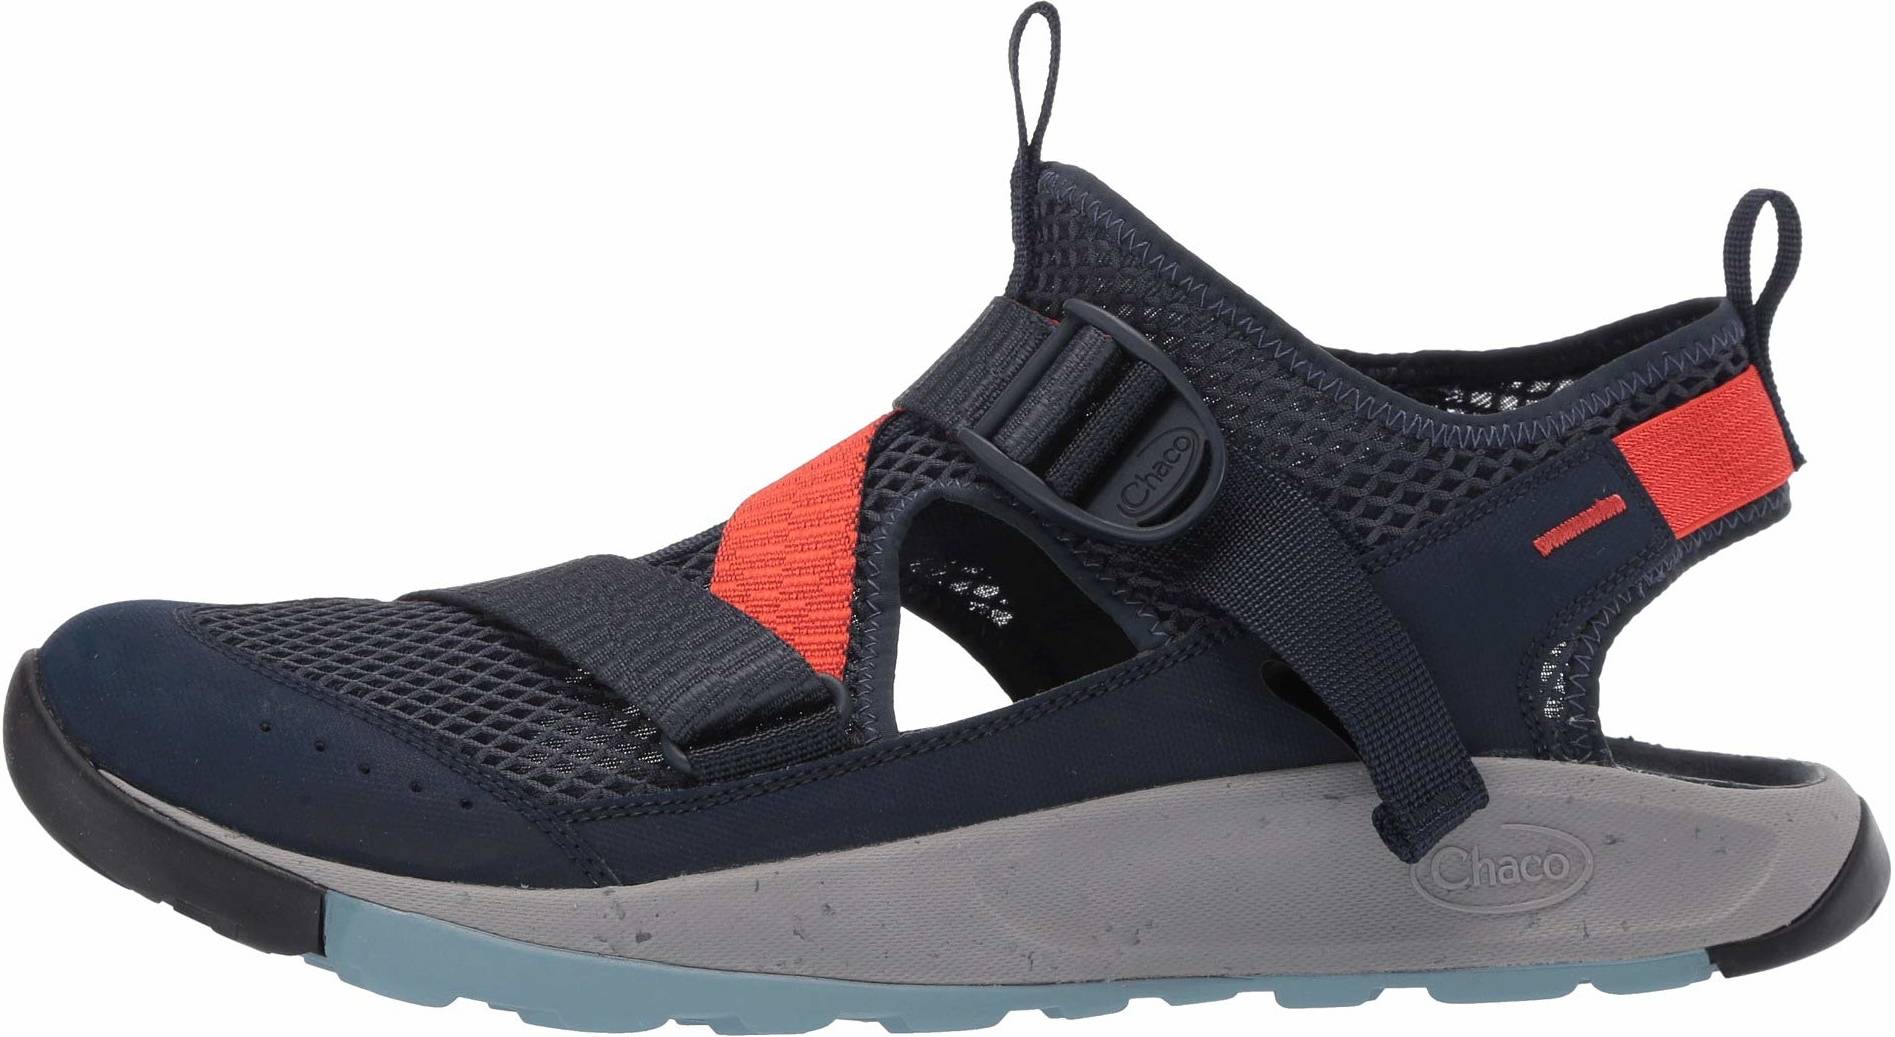 Only $43 + Review of Chaco Odyssey 